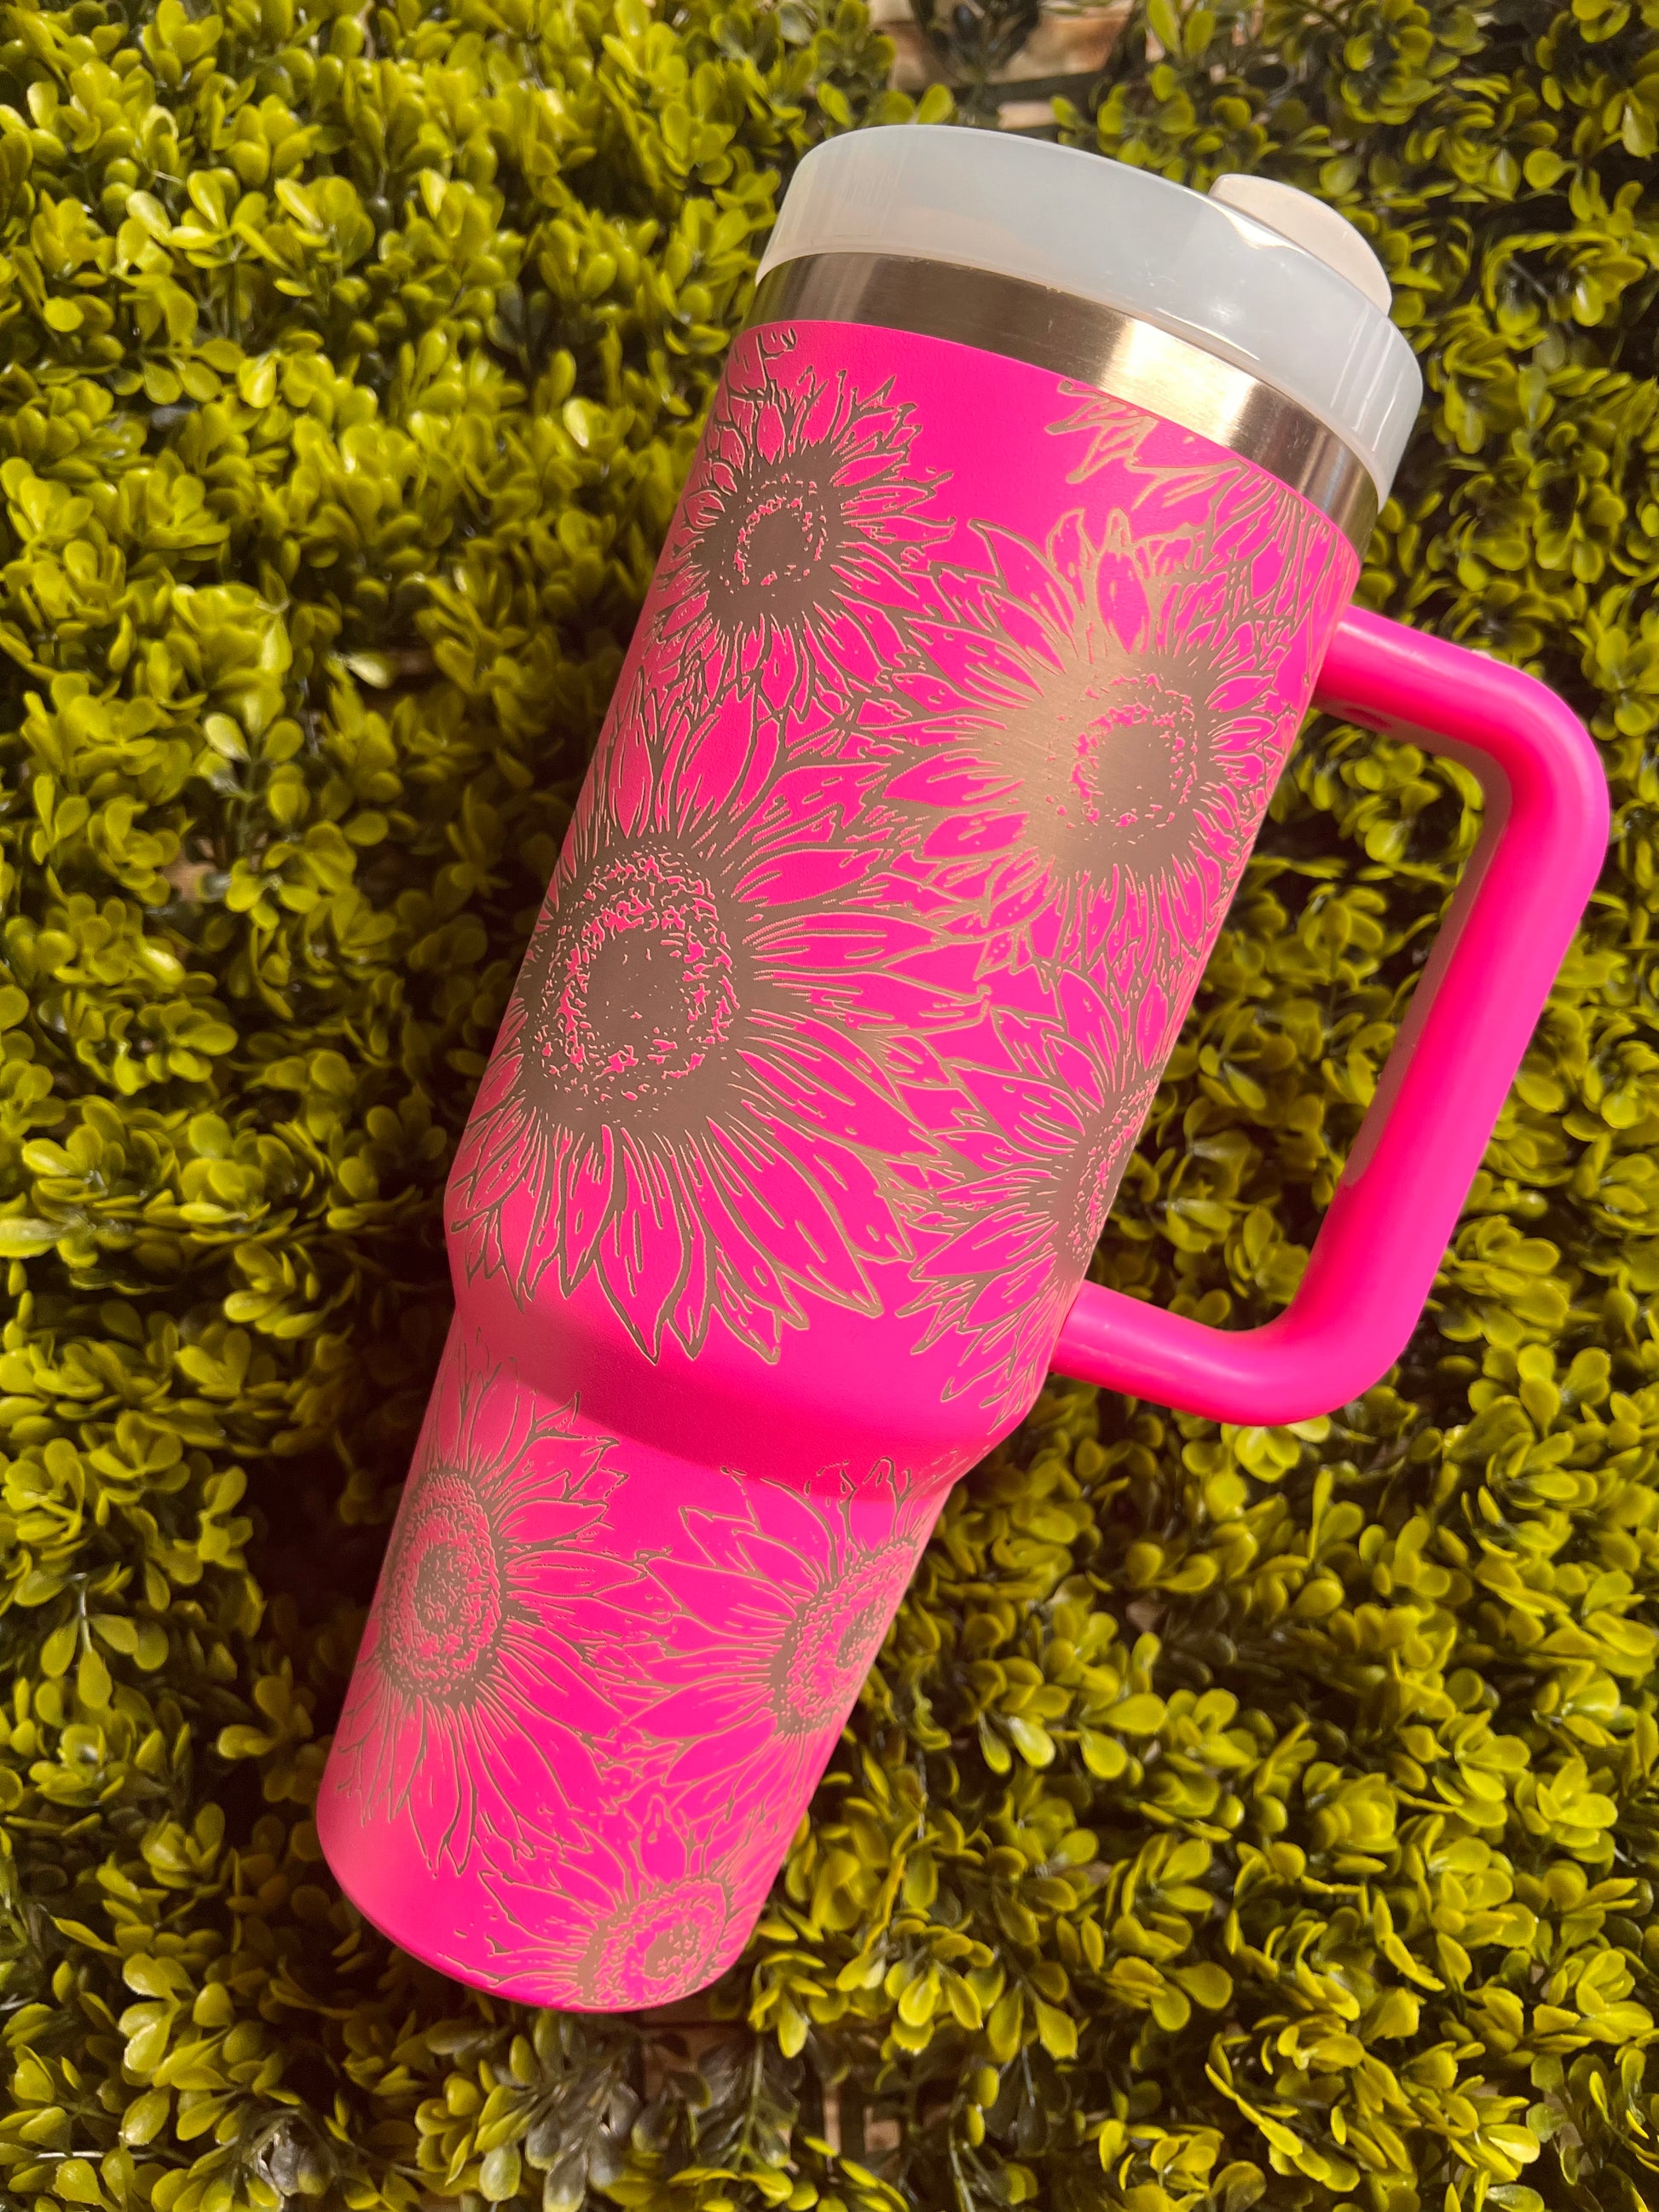 Custom Engraved 40oz Engraved Tumbler with Handle and Straw, Design: CUSTOM  - Everything Etched